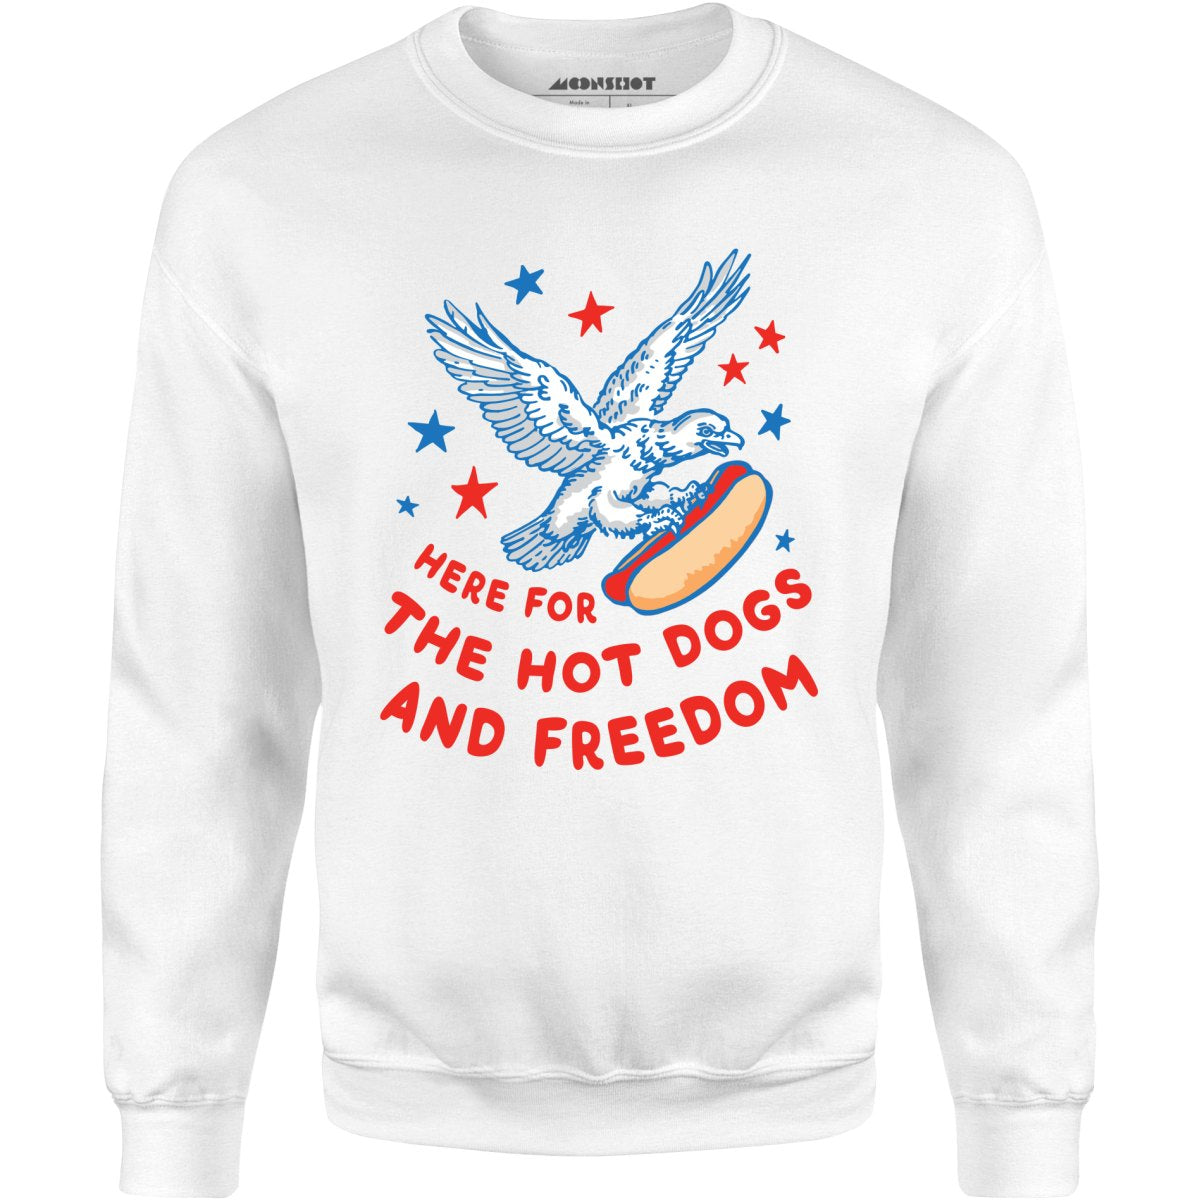 Here For The Hot Dogs and Freedom - Unisex Sweatshirt